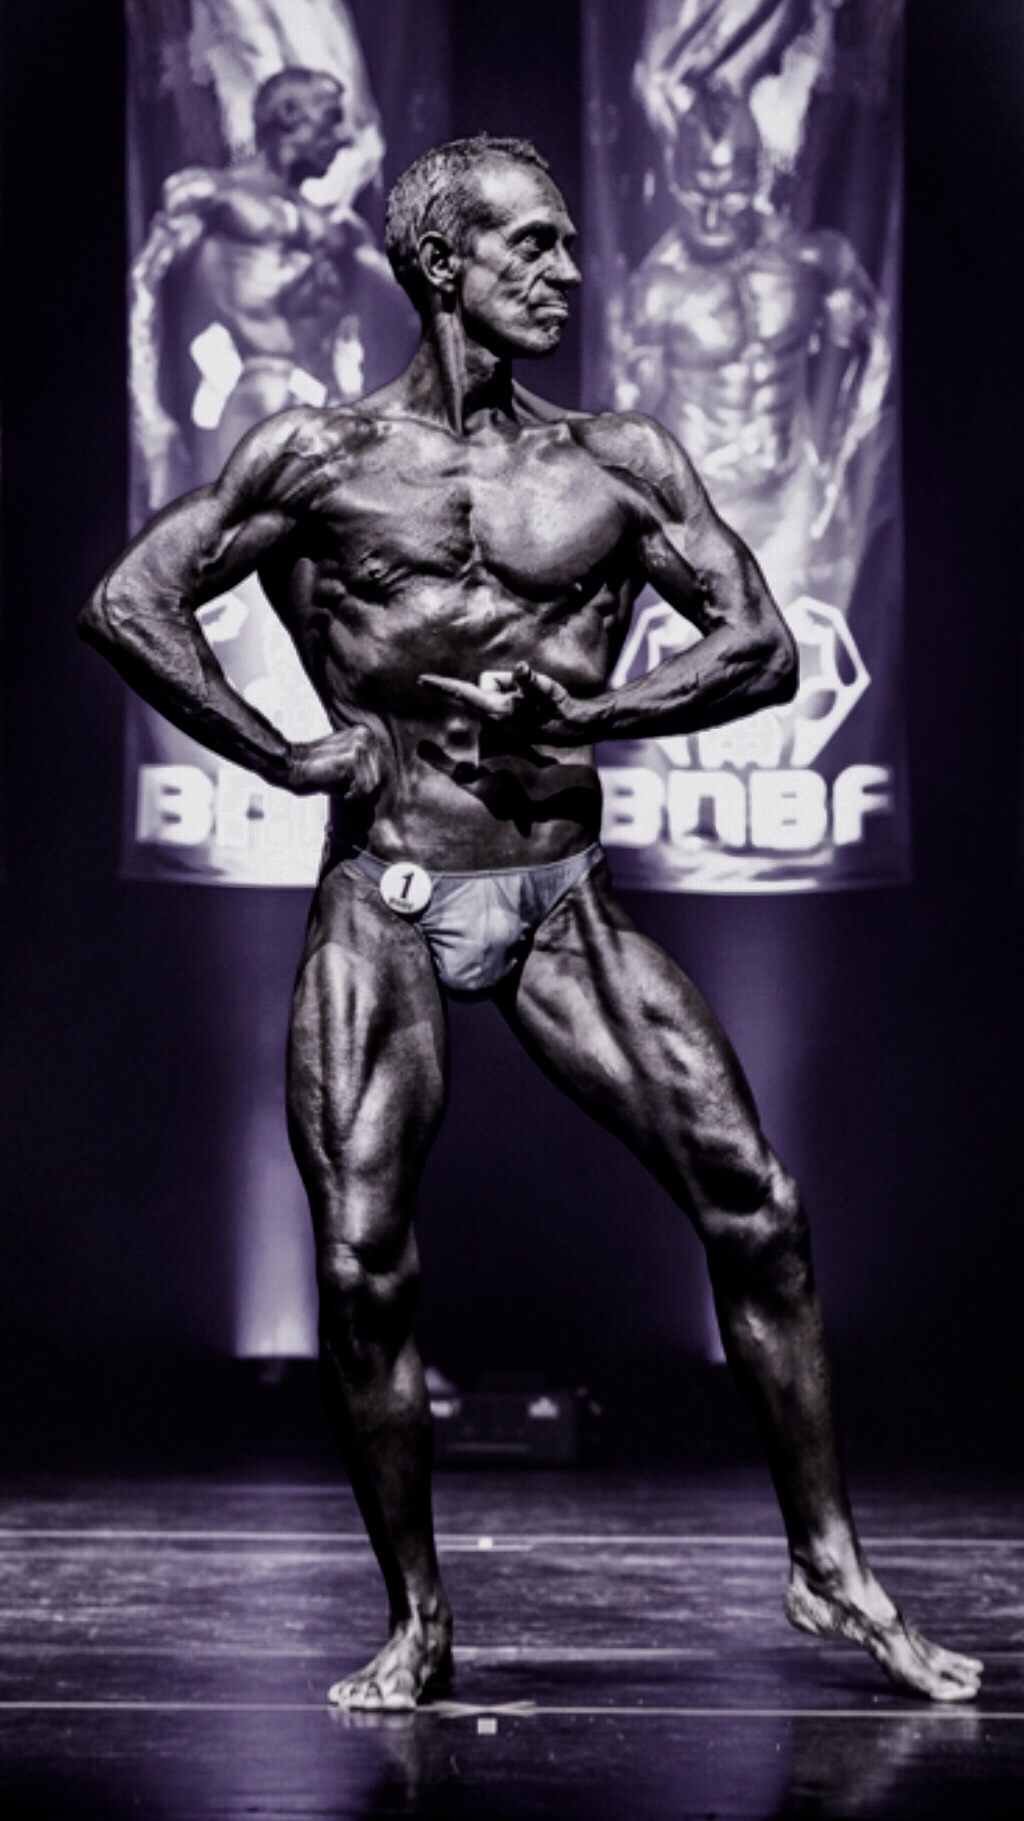 An image of Tim Sharp Places 10th Over 50 in the 2019 BNBF British goes here.